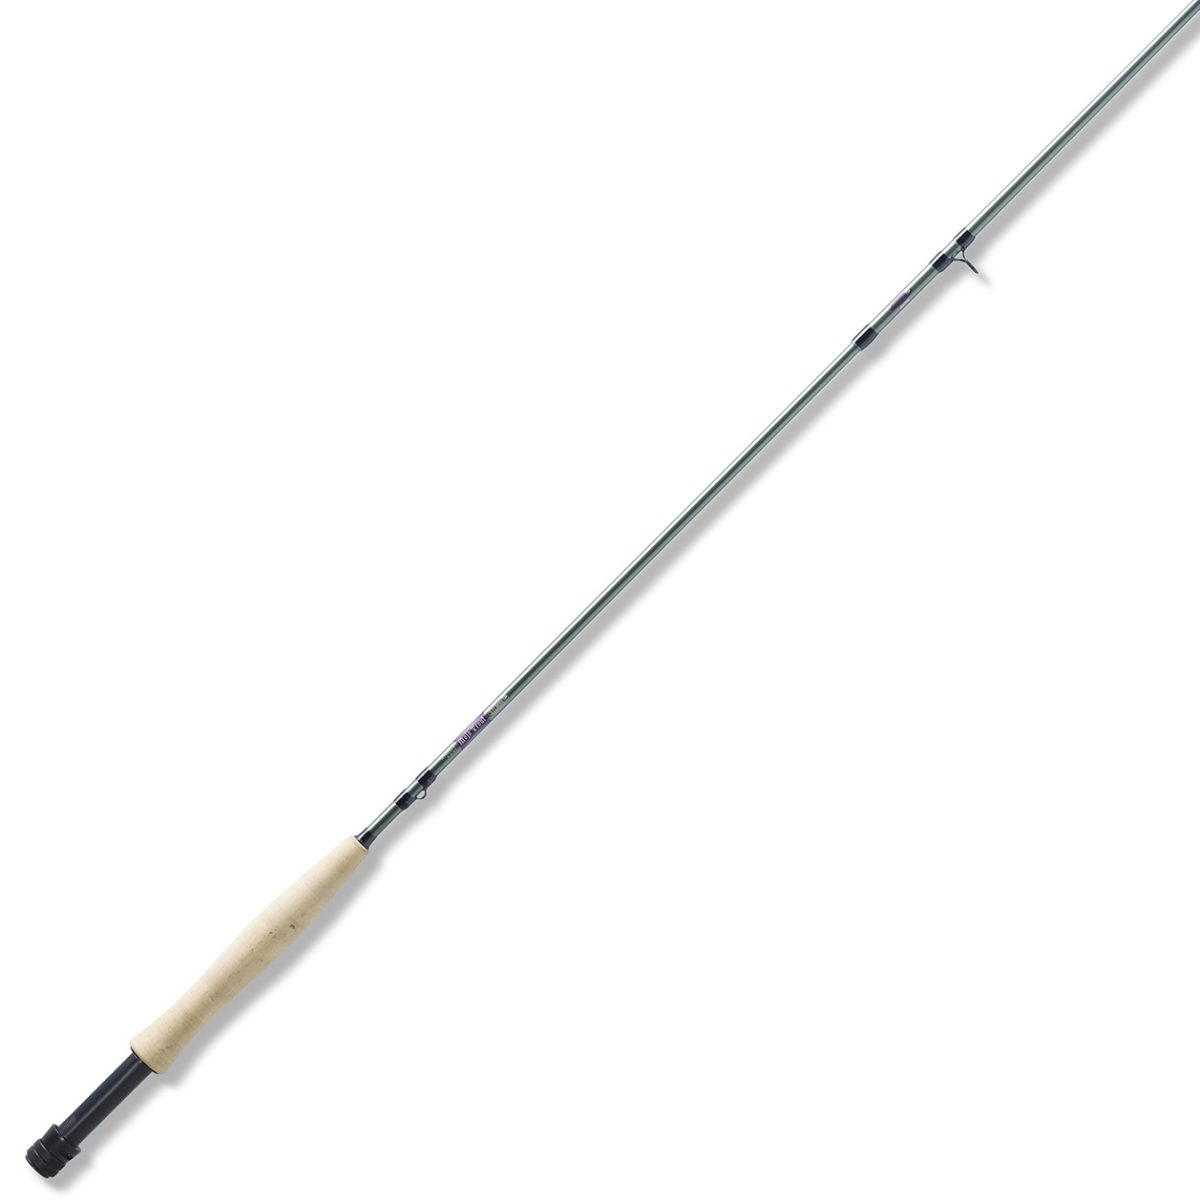 St. Croix Mojo Trout Fly Rod - MT865.4